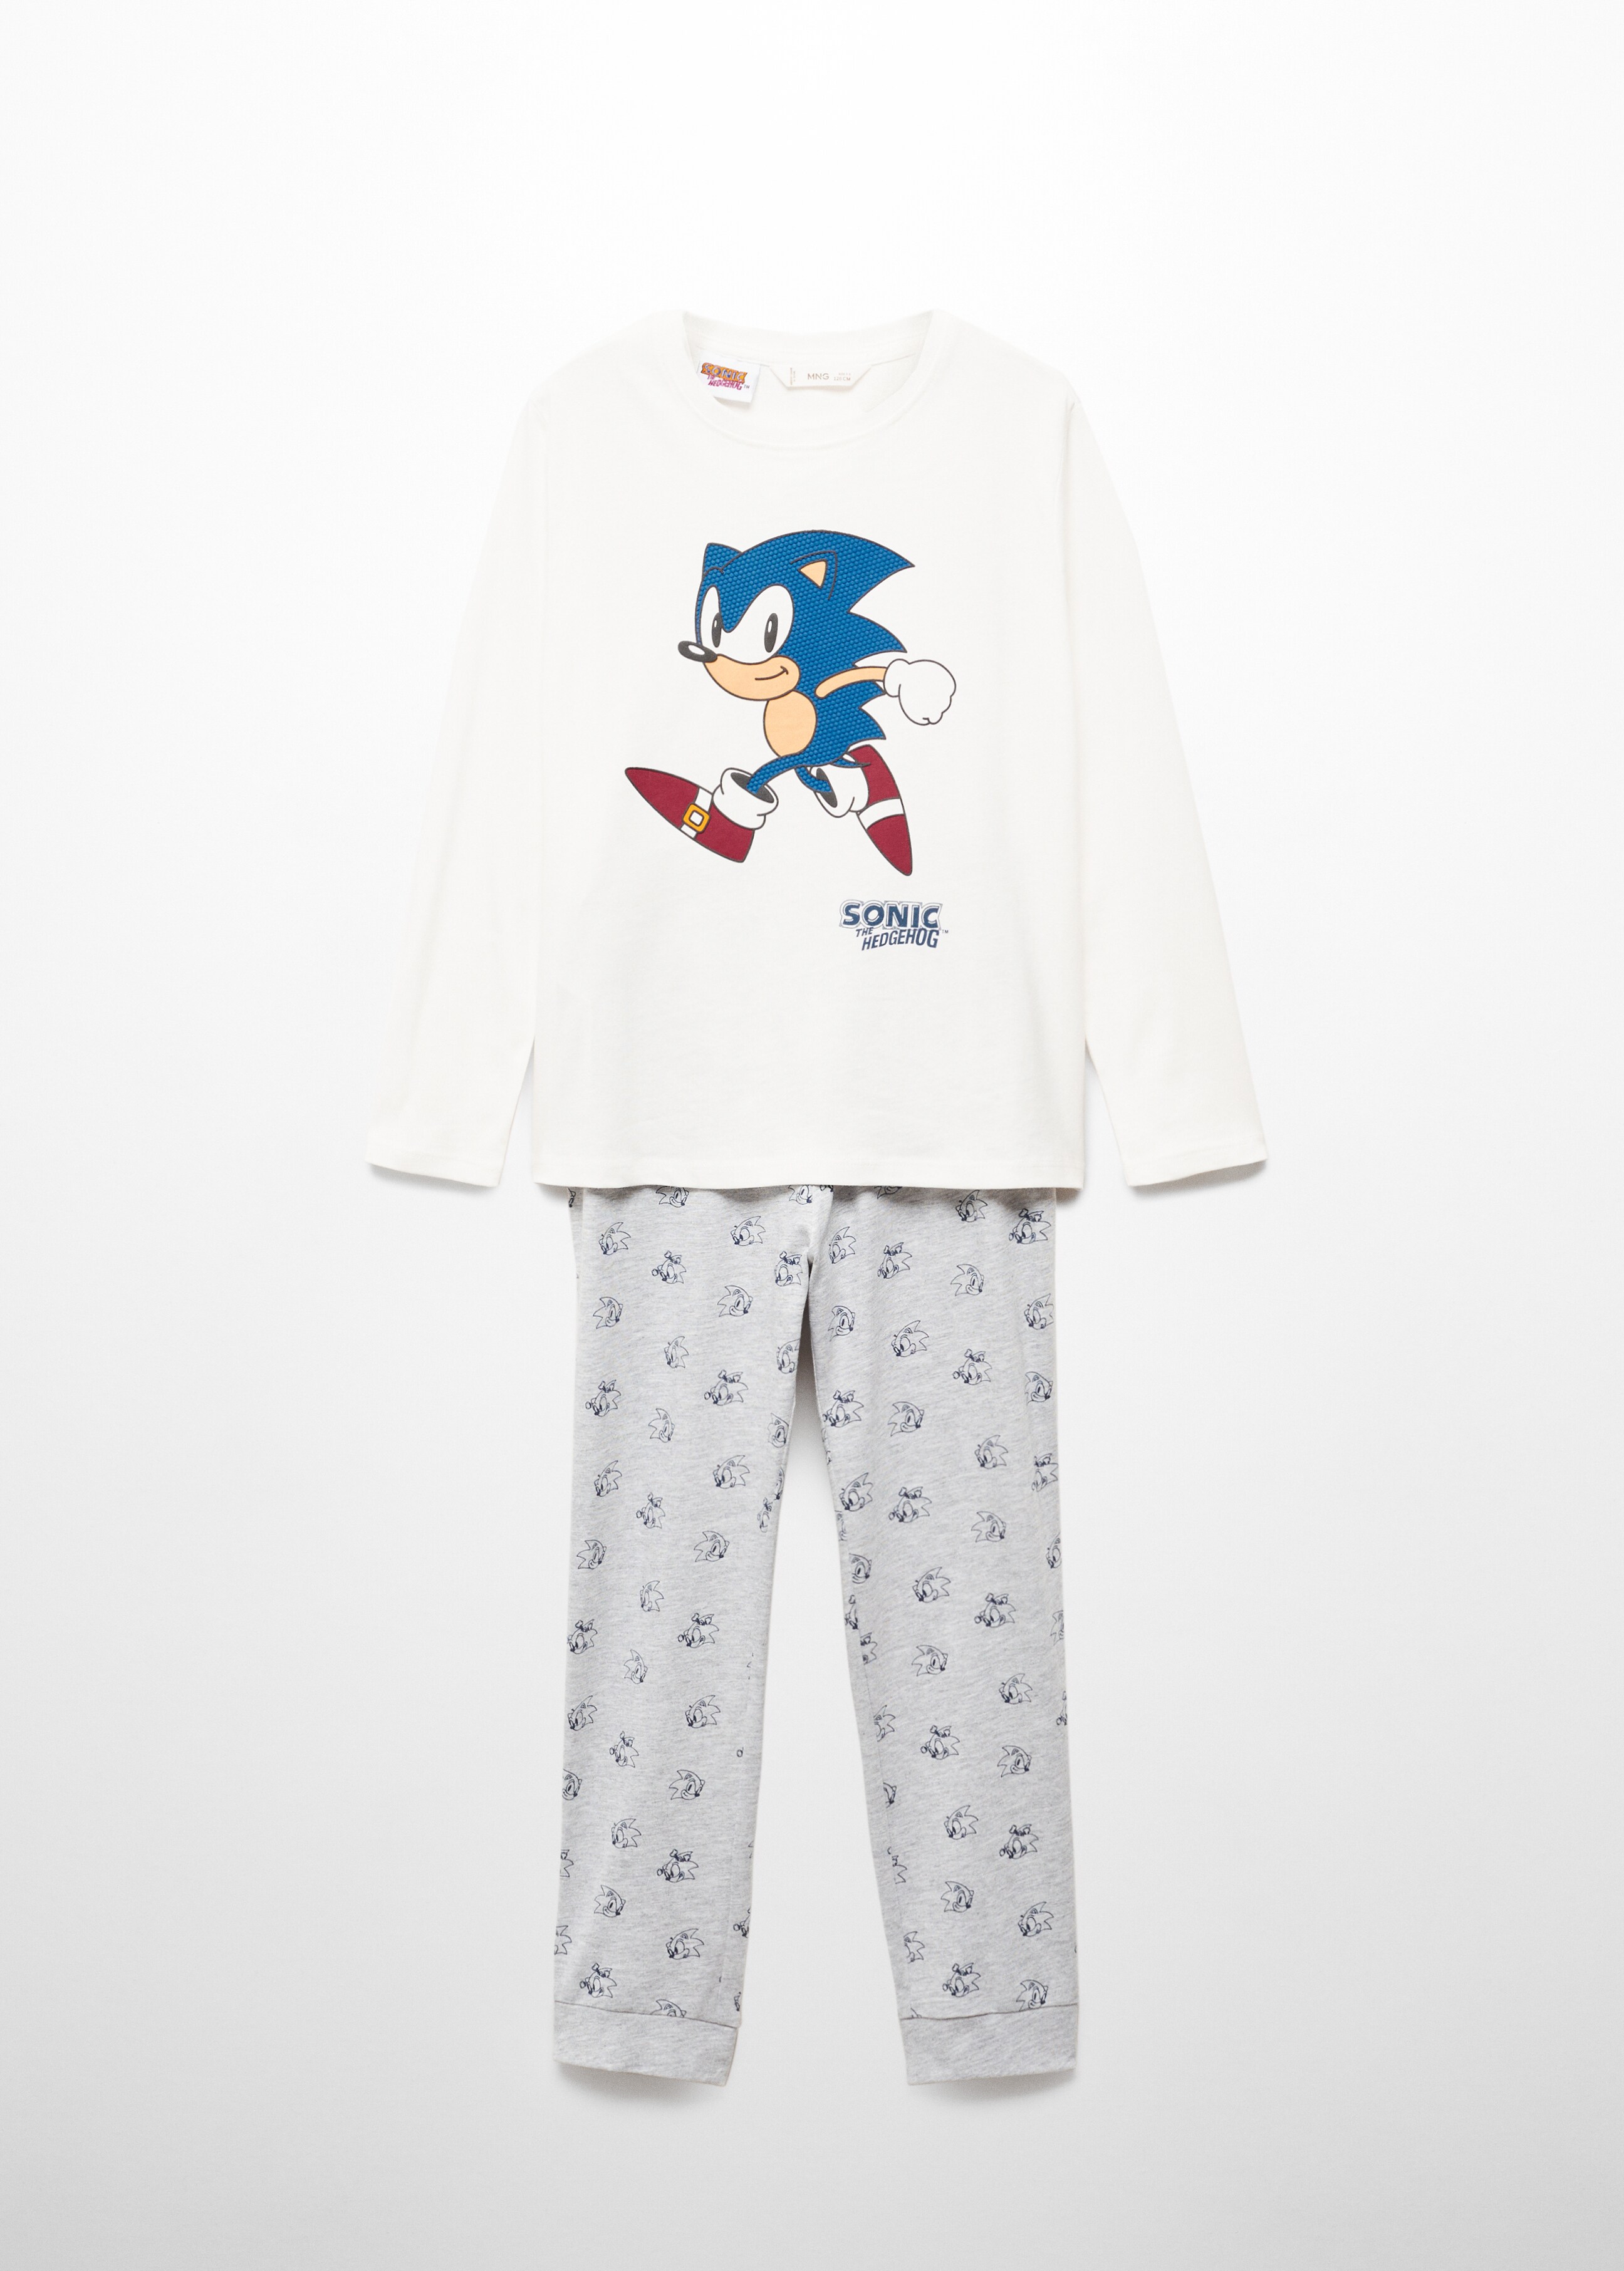 Sonic long pyjamas - Article without model